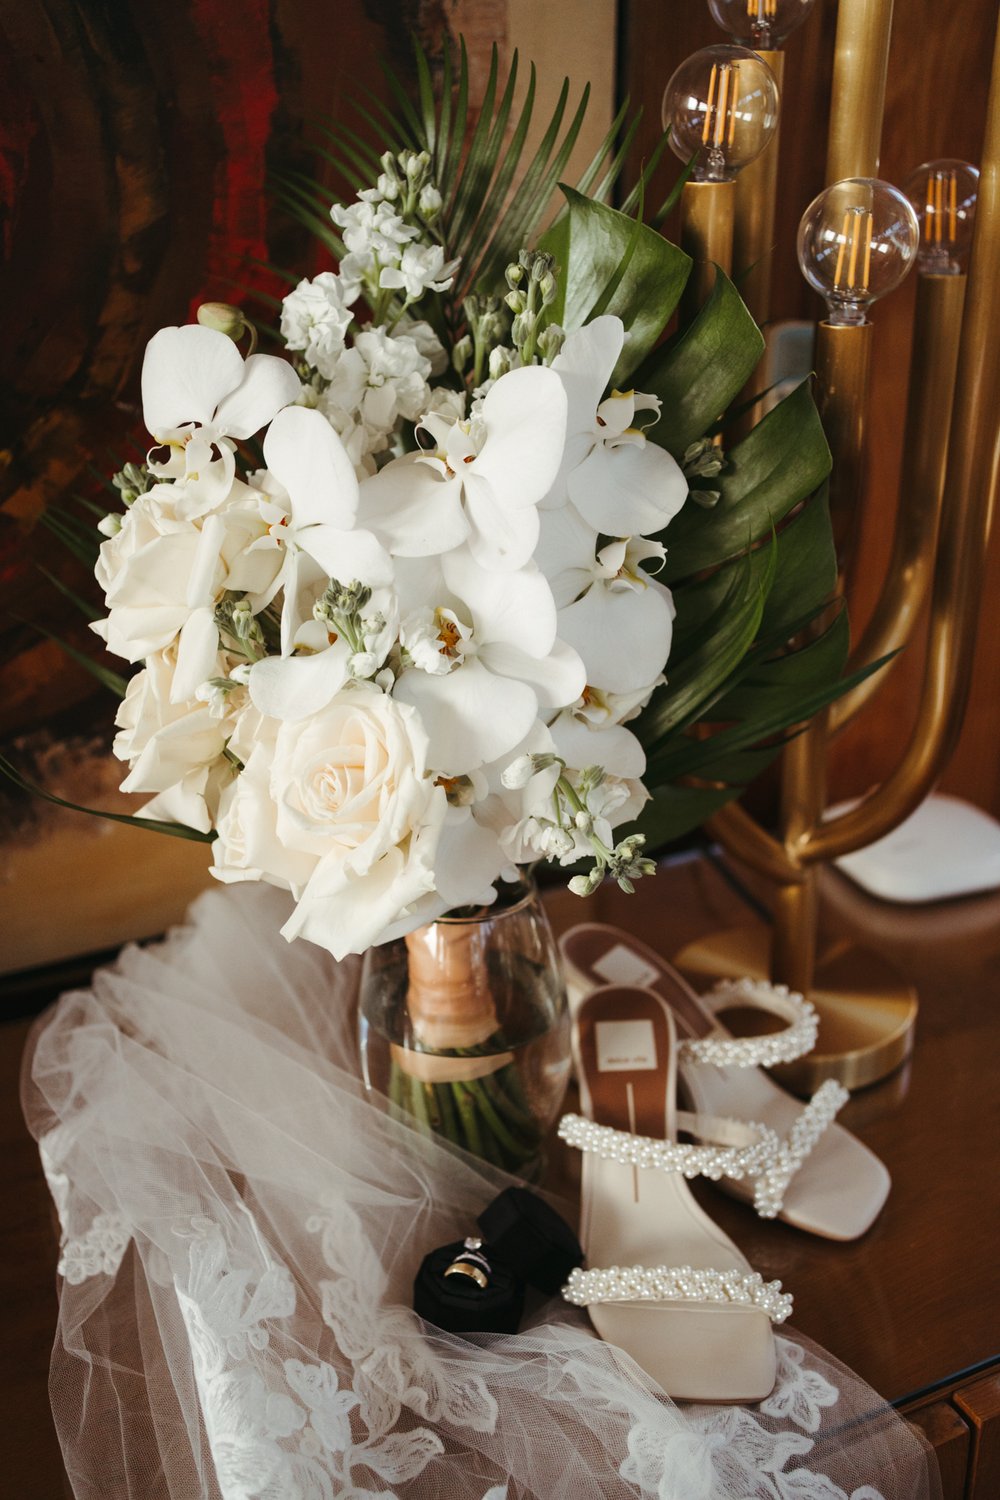 White luxury wedding bouquet  | The Lautner Compound Palm Springs Wedding | Tida Svy Photography | www.tidasvy.com